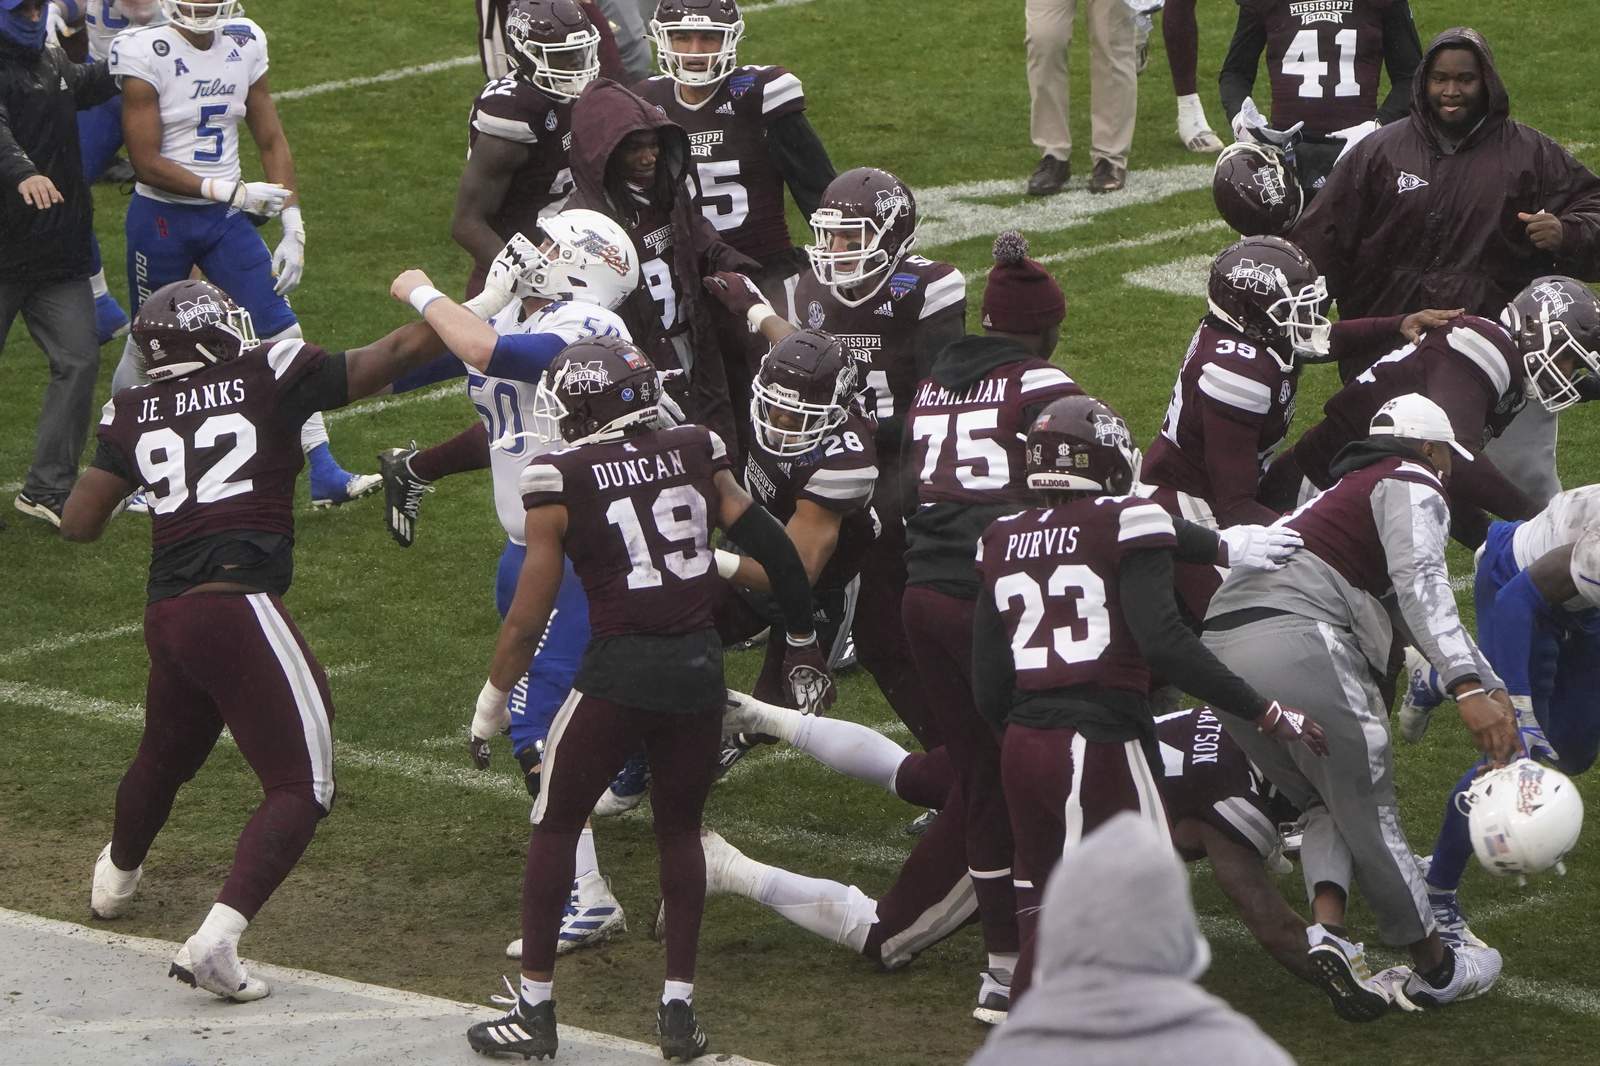 Brawl mars Mississippi State’s Armed Forces win over Tulsa